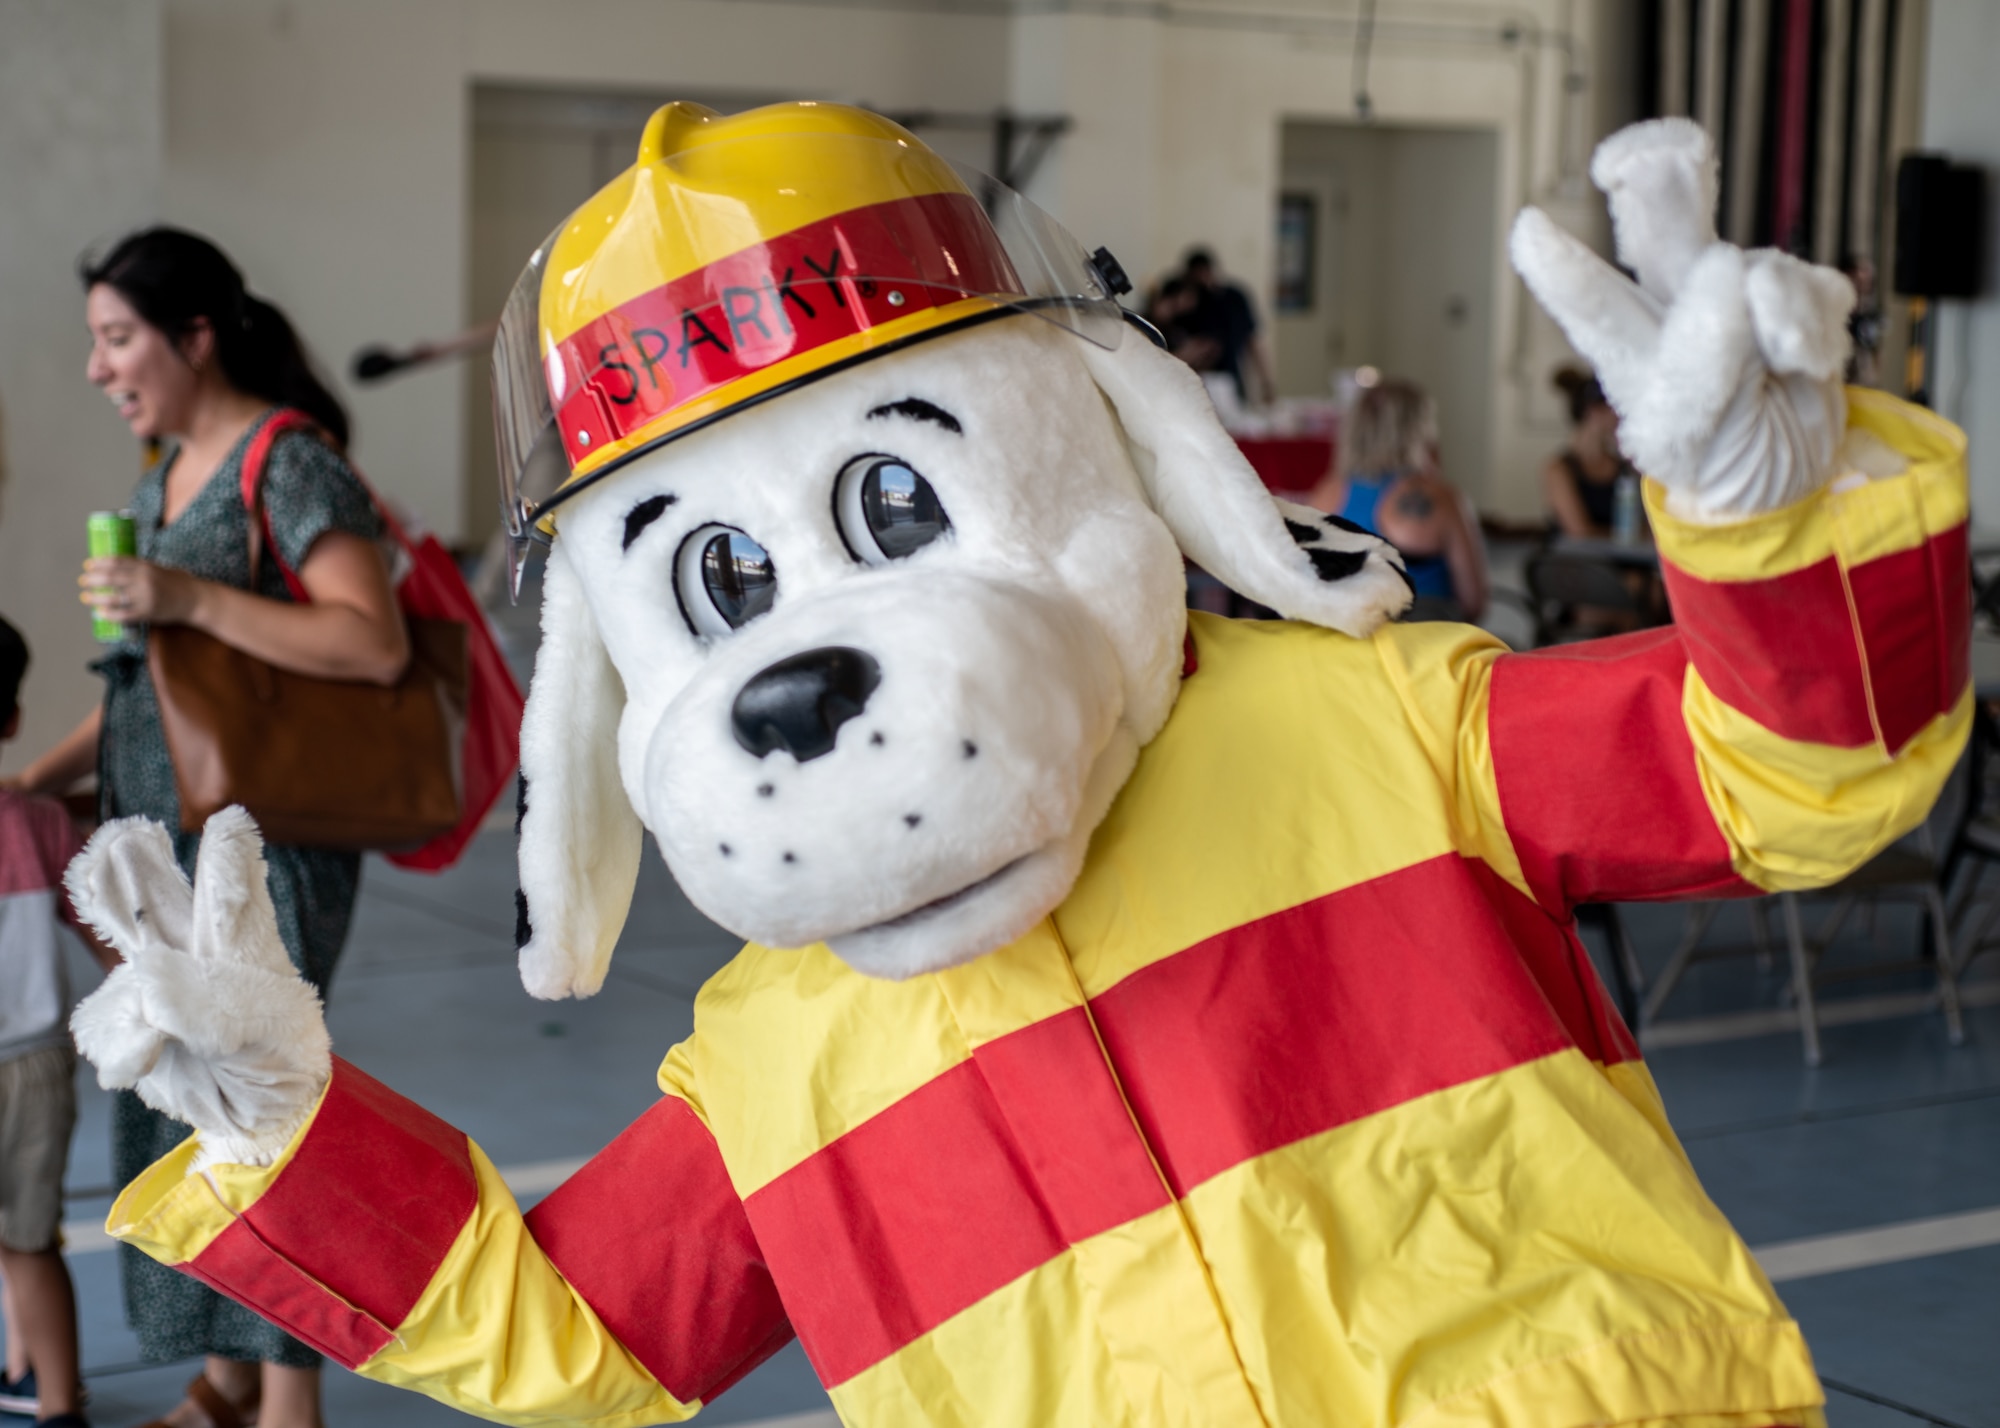 Sparky the dog, a fire station mascot, greets guests at an open house